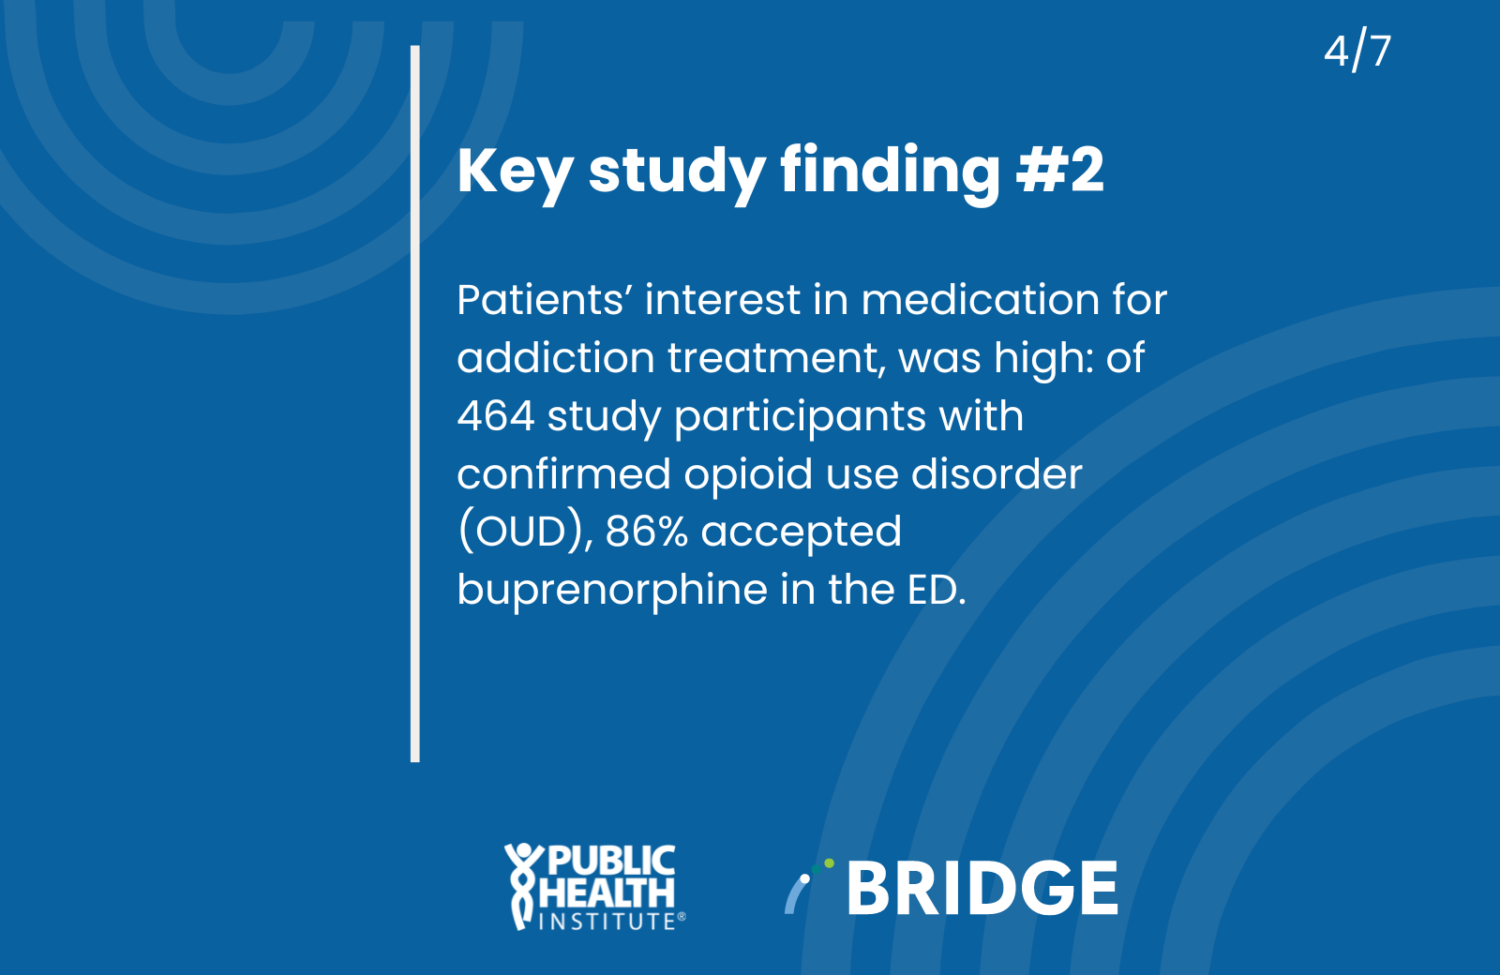 Key study finding #2 – Patients’ interest in medication for addiction treatment, was high: of 464 study participants with confirmed opioid use disorder (OUD), 86% accepted buprenorphine in the ED.